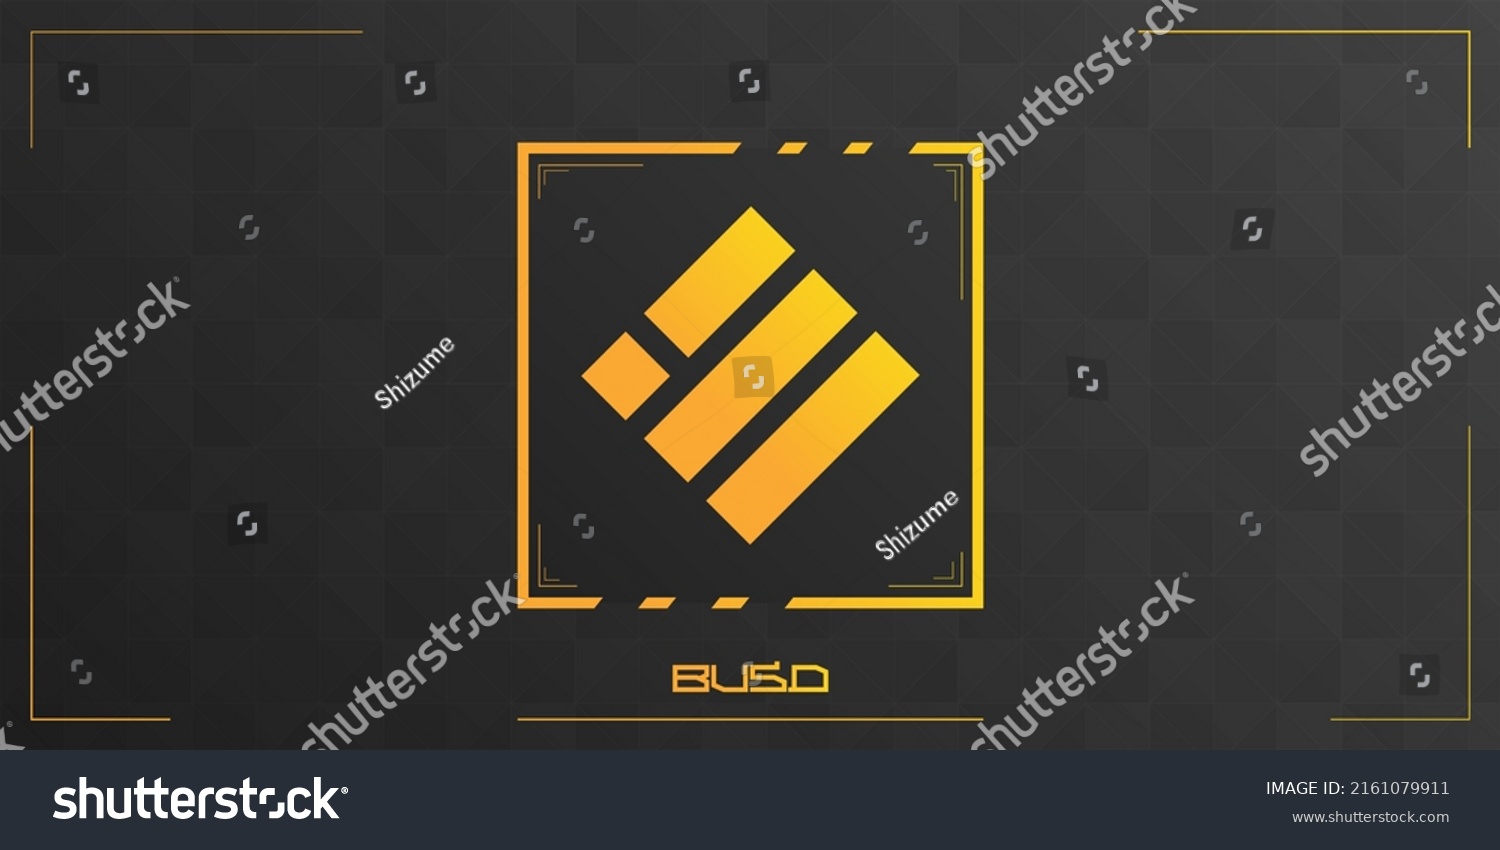 SVG of BUSD cryptocurrency colorful logo on dark background with triangles pattern decoration. Vector illustration. svg